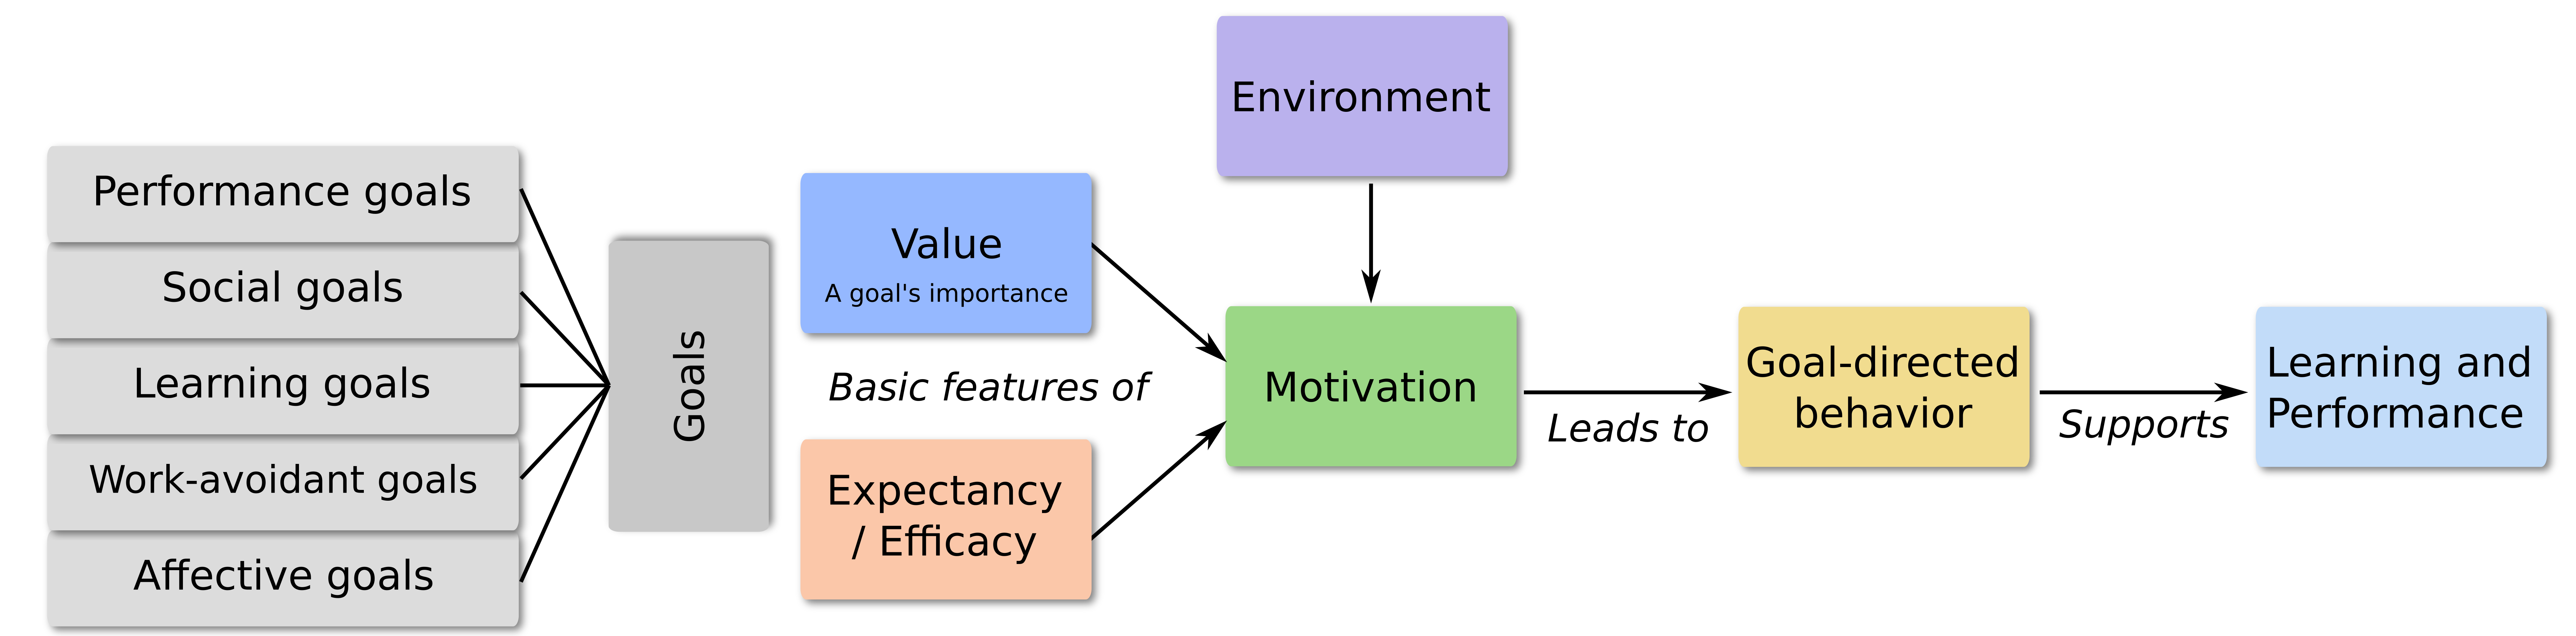 7 main boxes: a grey one with "Goals" written in it, a green one with "Motivation" in it, an blue one with "Value. A goal's importance" written in it, an orange one with "Expectancy / Efficacy" in it, a yellow one with "Goal-directed behavior" in it, a light blue with "Learning and Performance" written, a lila one with "Environment" written. 5 smaller boxes stacked on each other on the left of the "Goals" box with "Performance goals", "Social goals", "Learning goals", "Work-avoidant goals", "Affective goals" written inside. "Basic features of" written between "Goals" and "Motivation". 3 arrows from "Value", "Expectancy" and "Environment" to "Motivation". 1 arrow  from "Motivation" to "Goal-directed behavior" with "Leads to" written below. 1 arrow from "Goal-directed behavior" to "Learning and Performance" with "Supports" written below. 